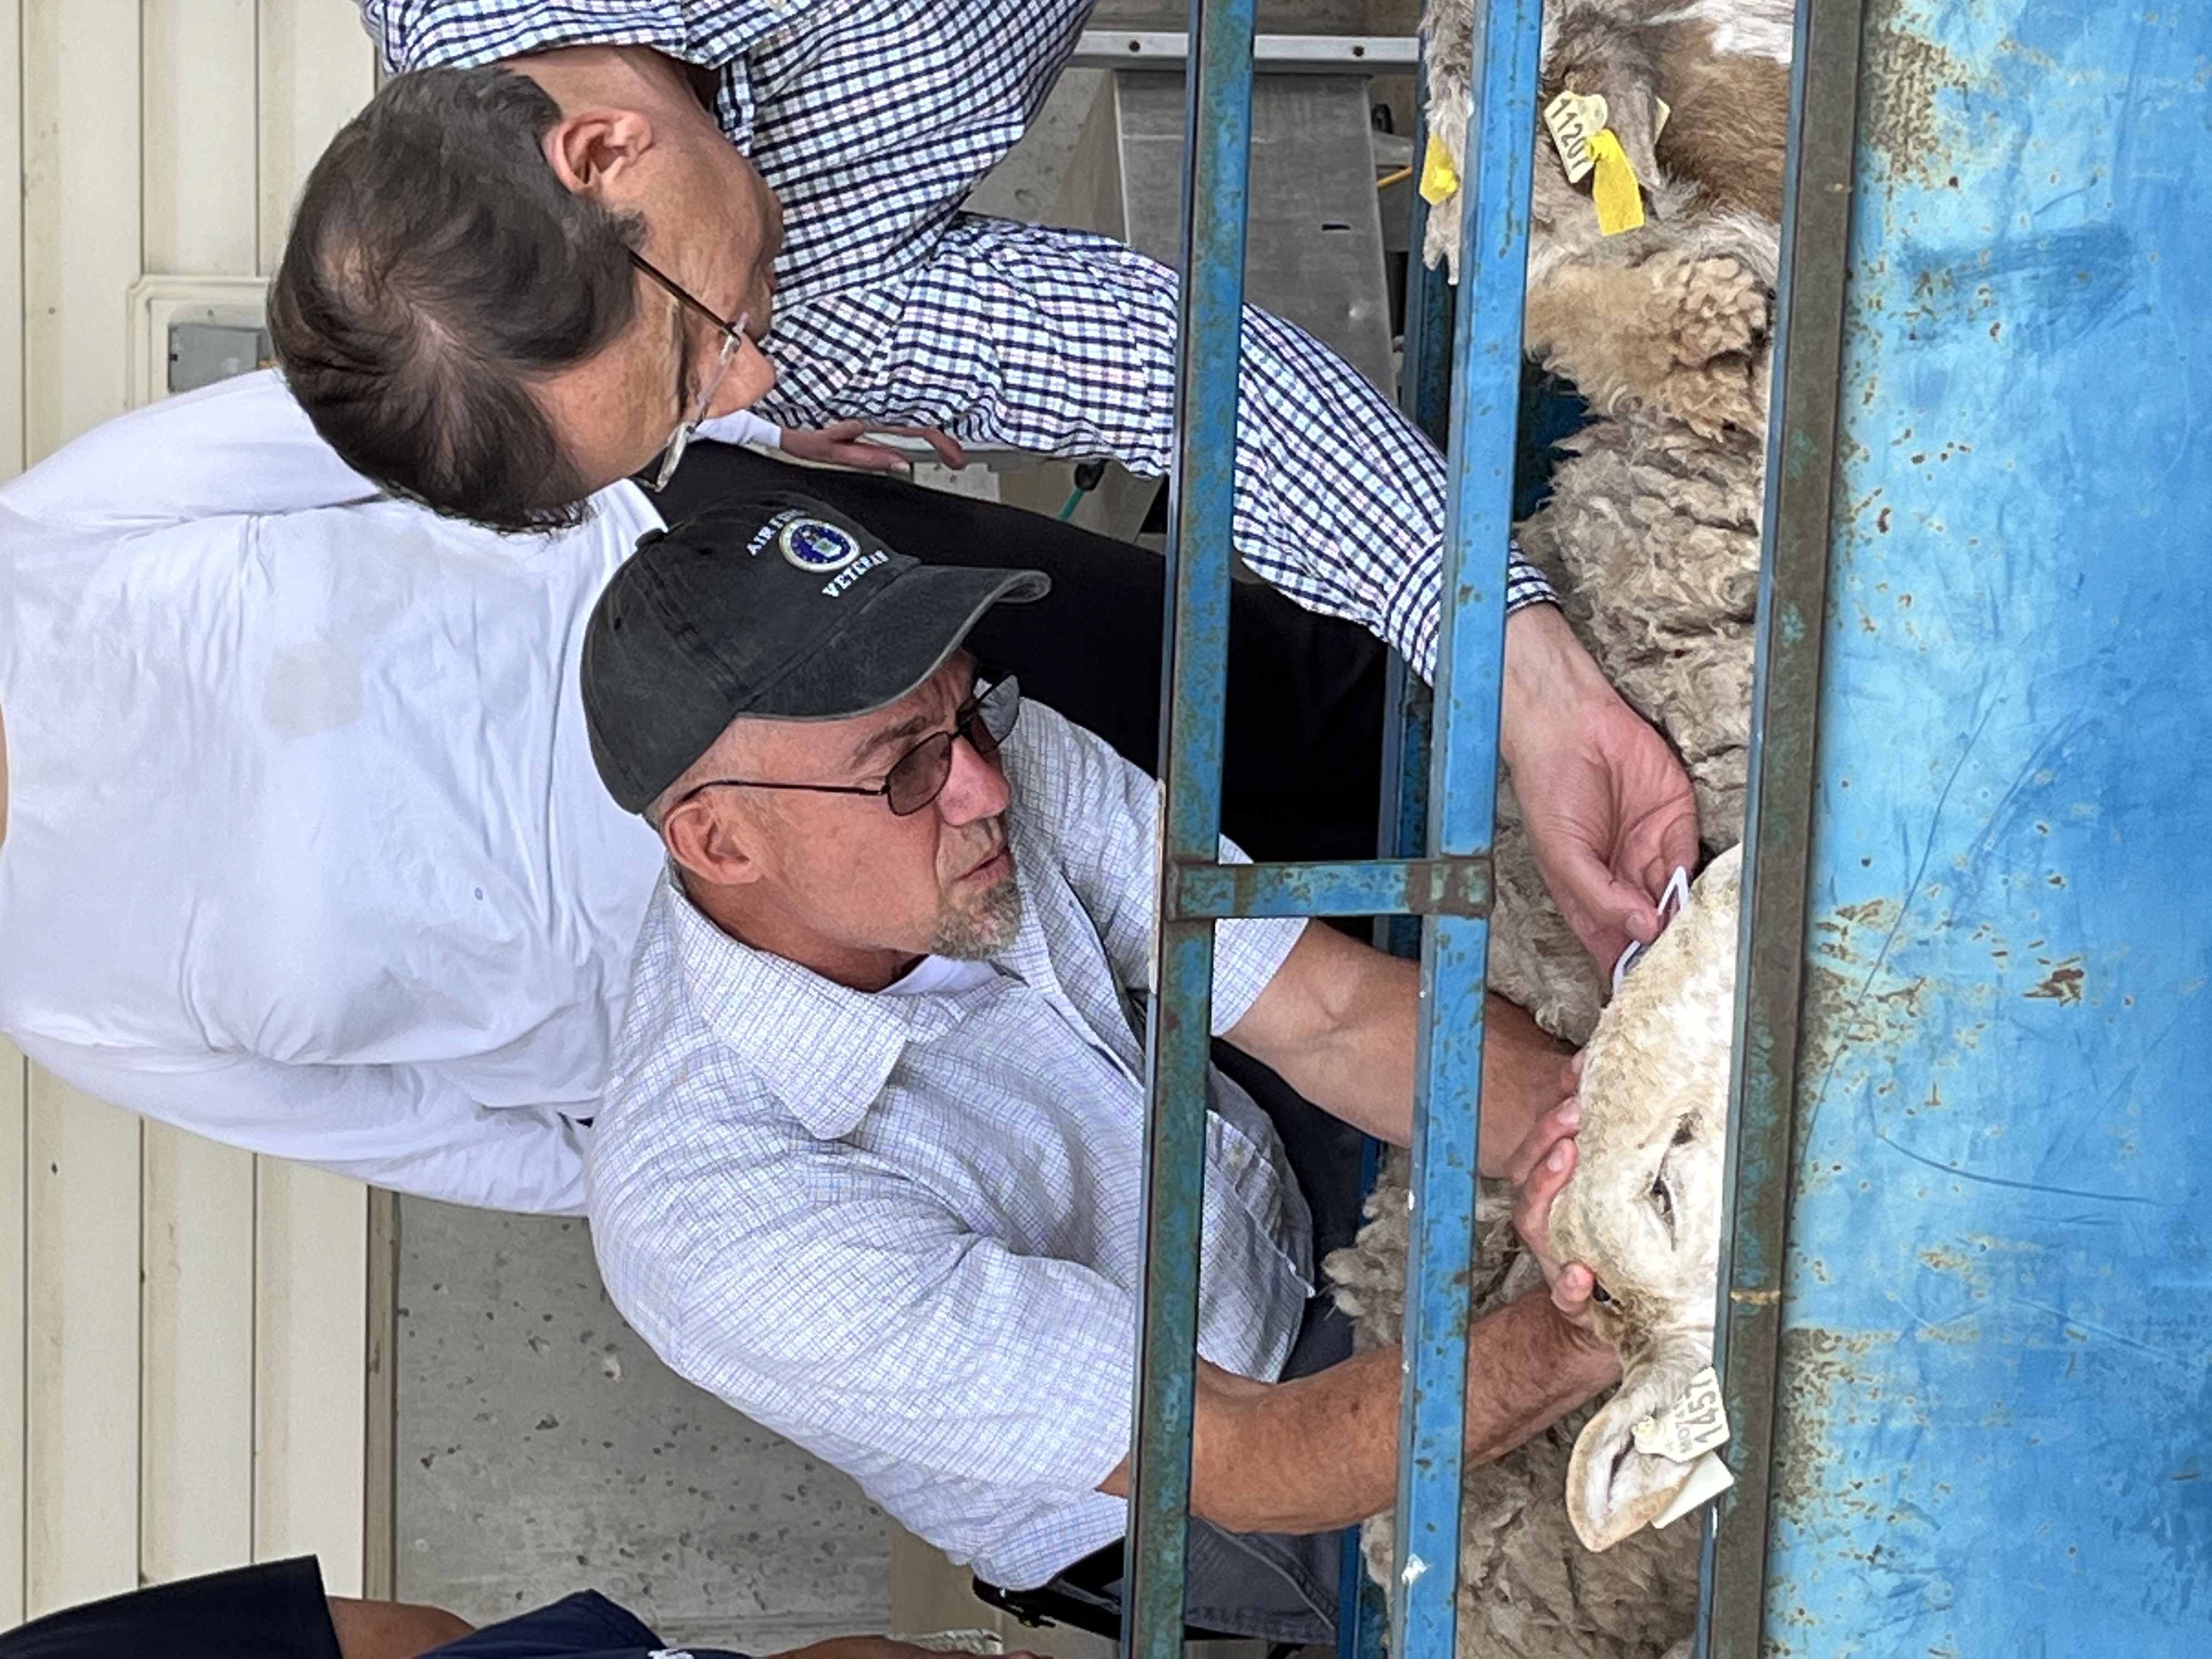 Assistant Professor and Small Ruminant Extension State Specialist & Research Homero Salinas, Ph.D., helps attendee assess sheep health using FAMACHA method